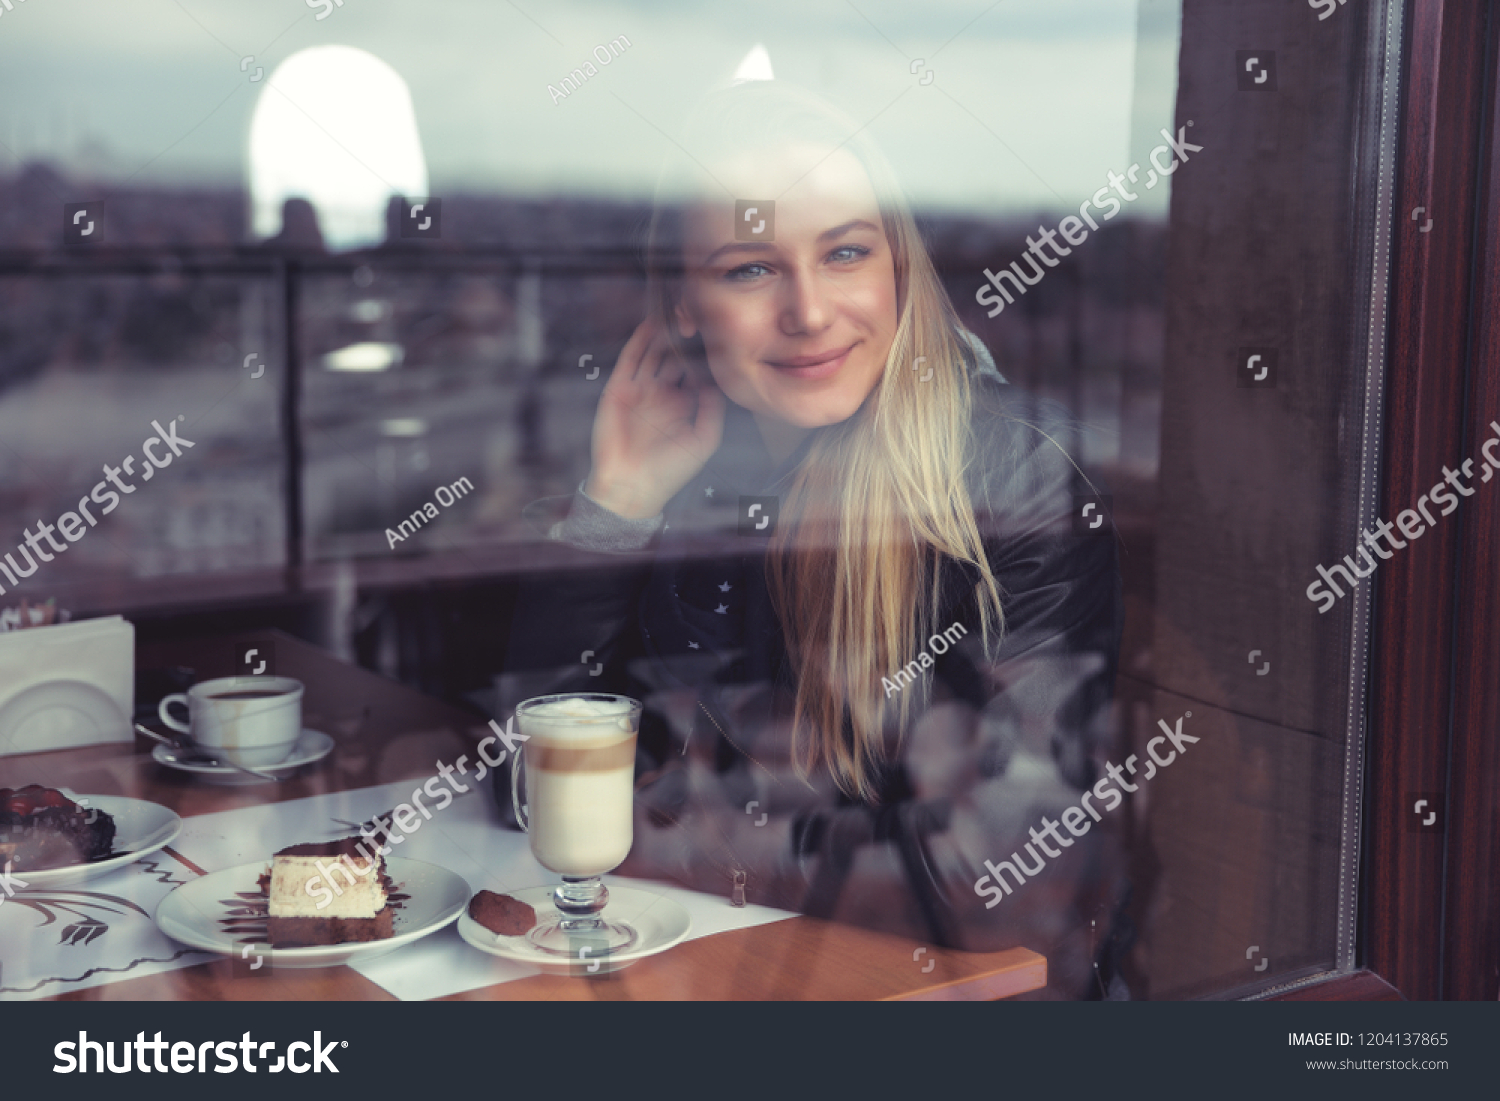 Nice female in cafe in warm cozy atmosphere, enjoying view through the window, casual urban life of young people #1204137865